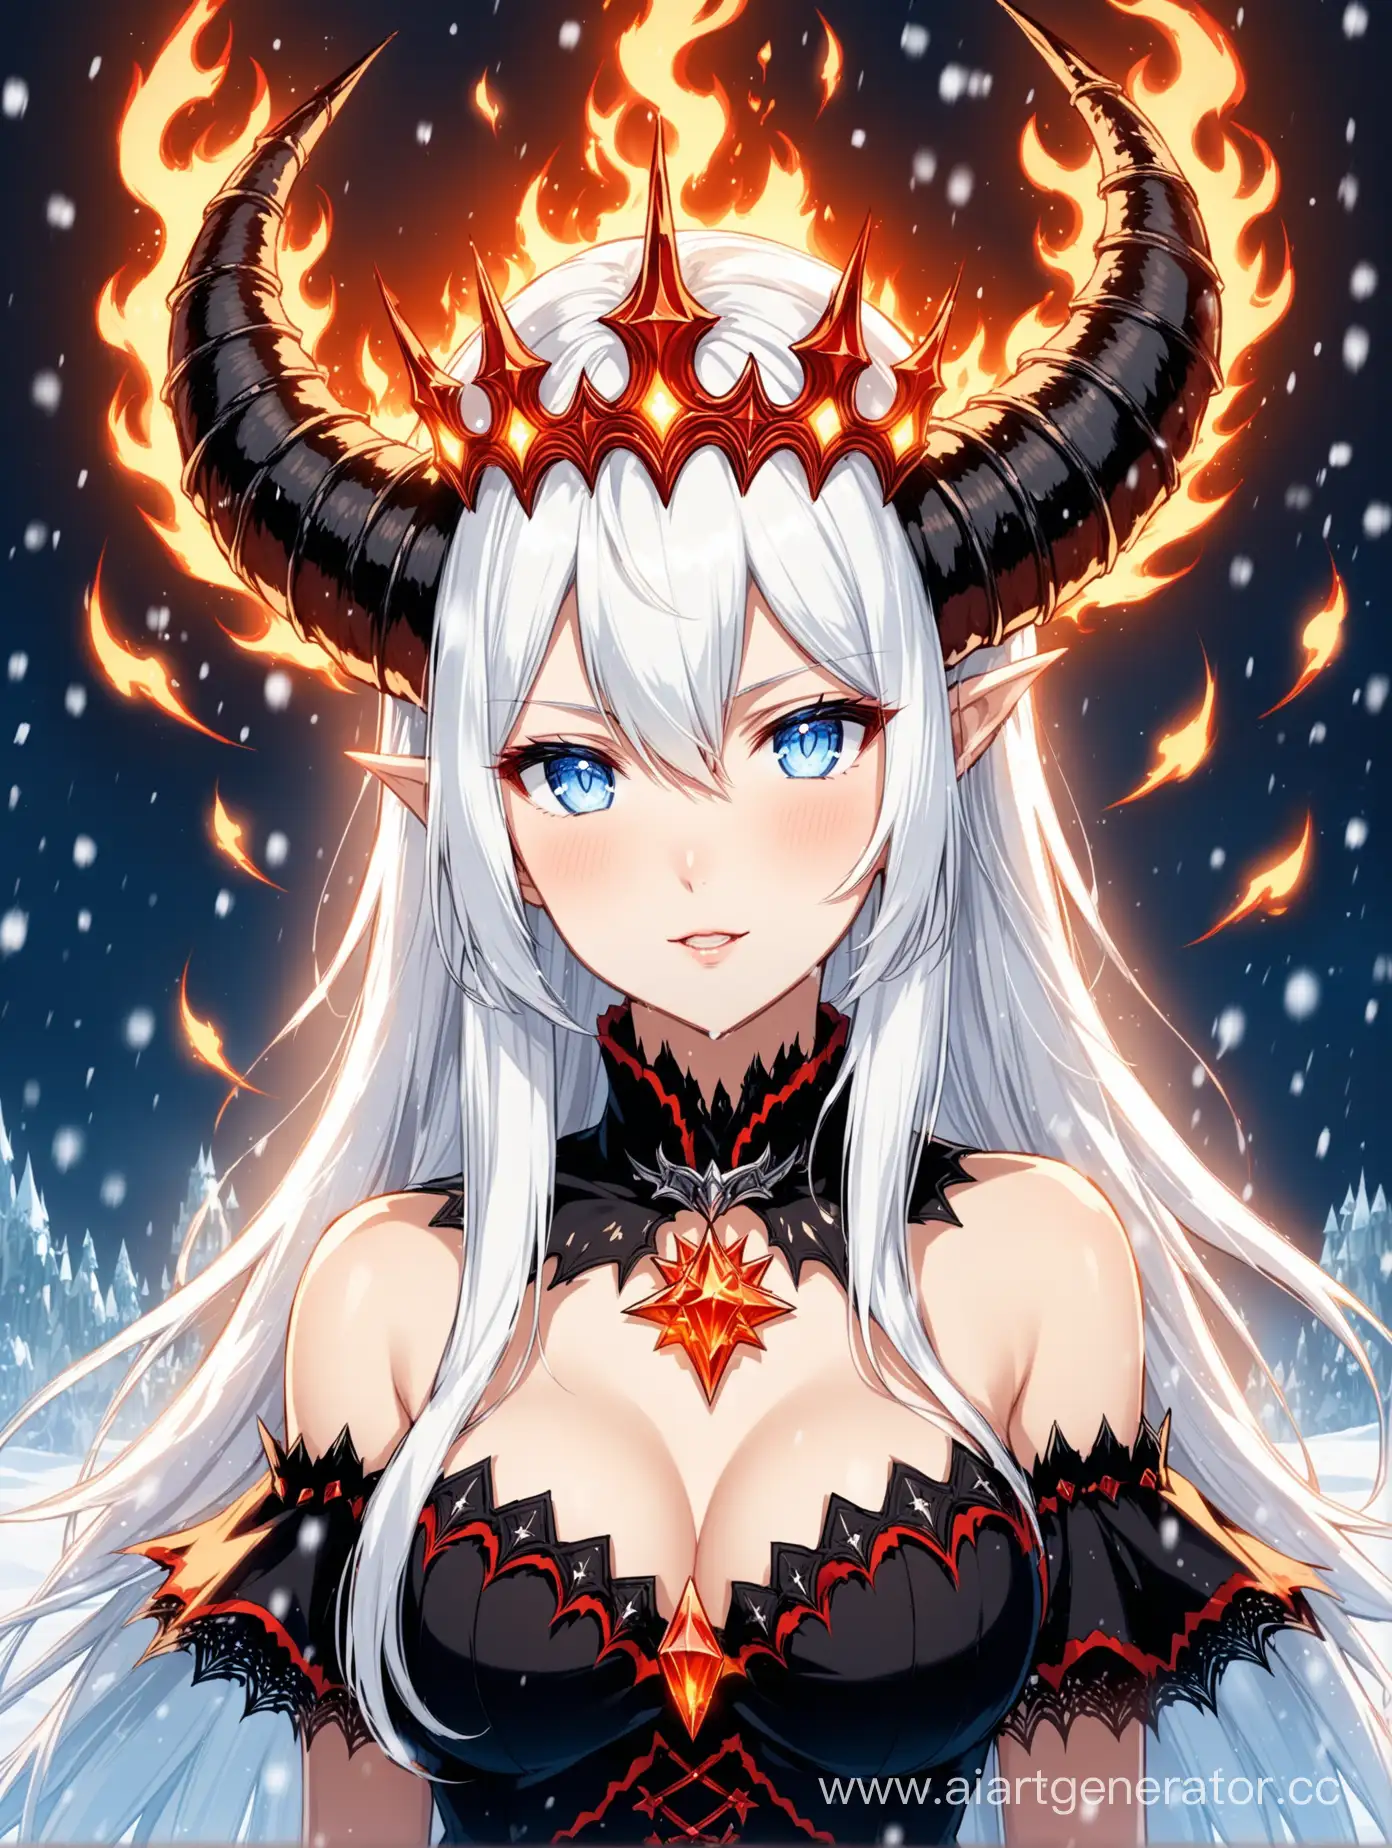 Beautiful-Anime-Goddess-of-Fire-and-Lightning-in-Frosty-Siberia